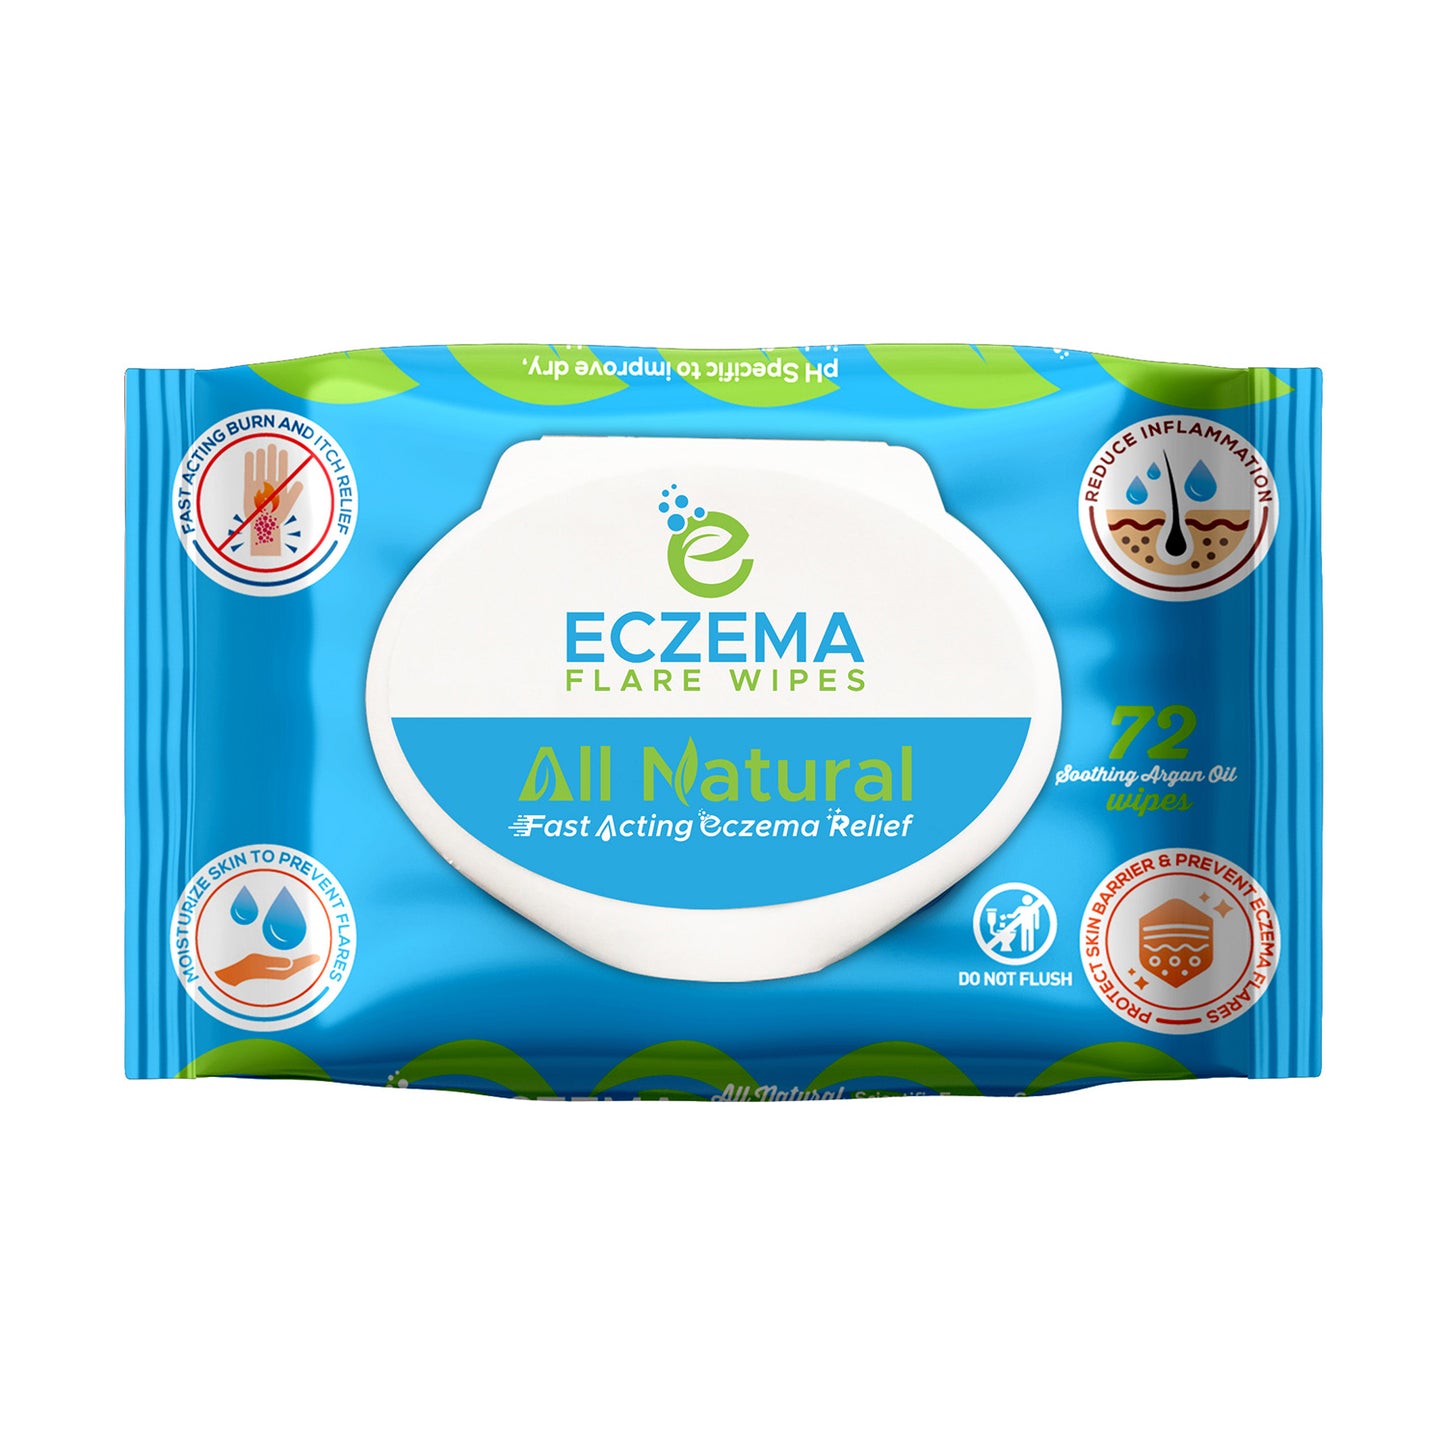 Eczema Flare Wipes front packaging photo